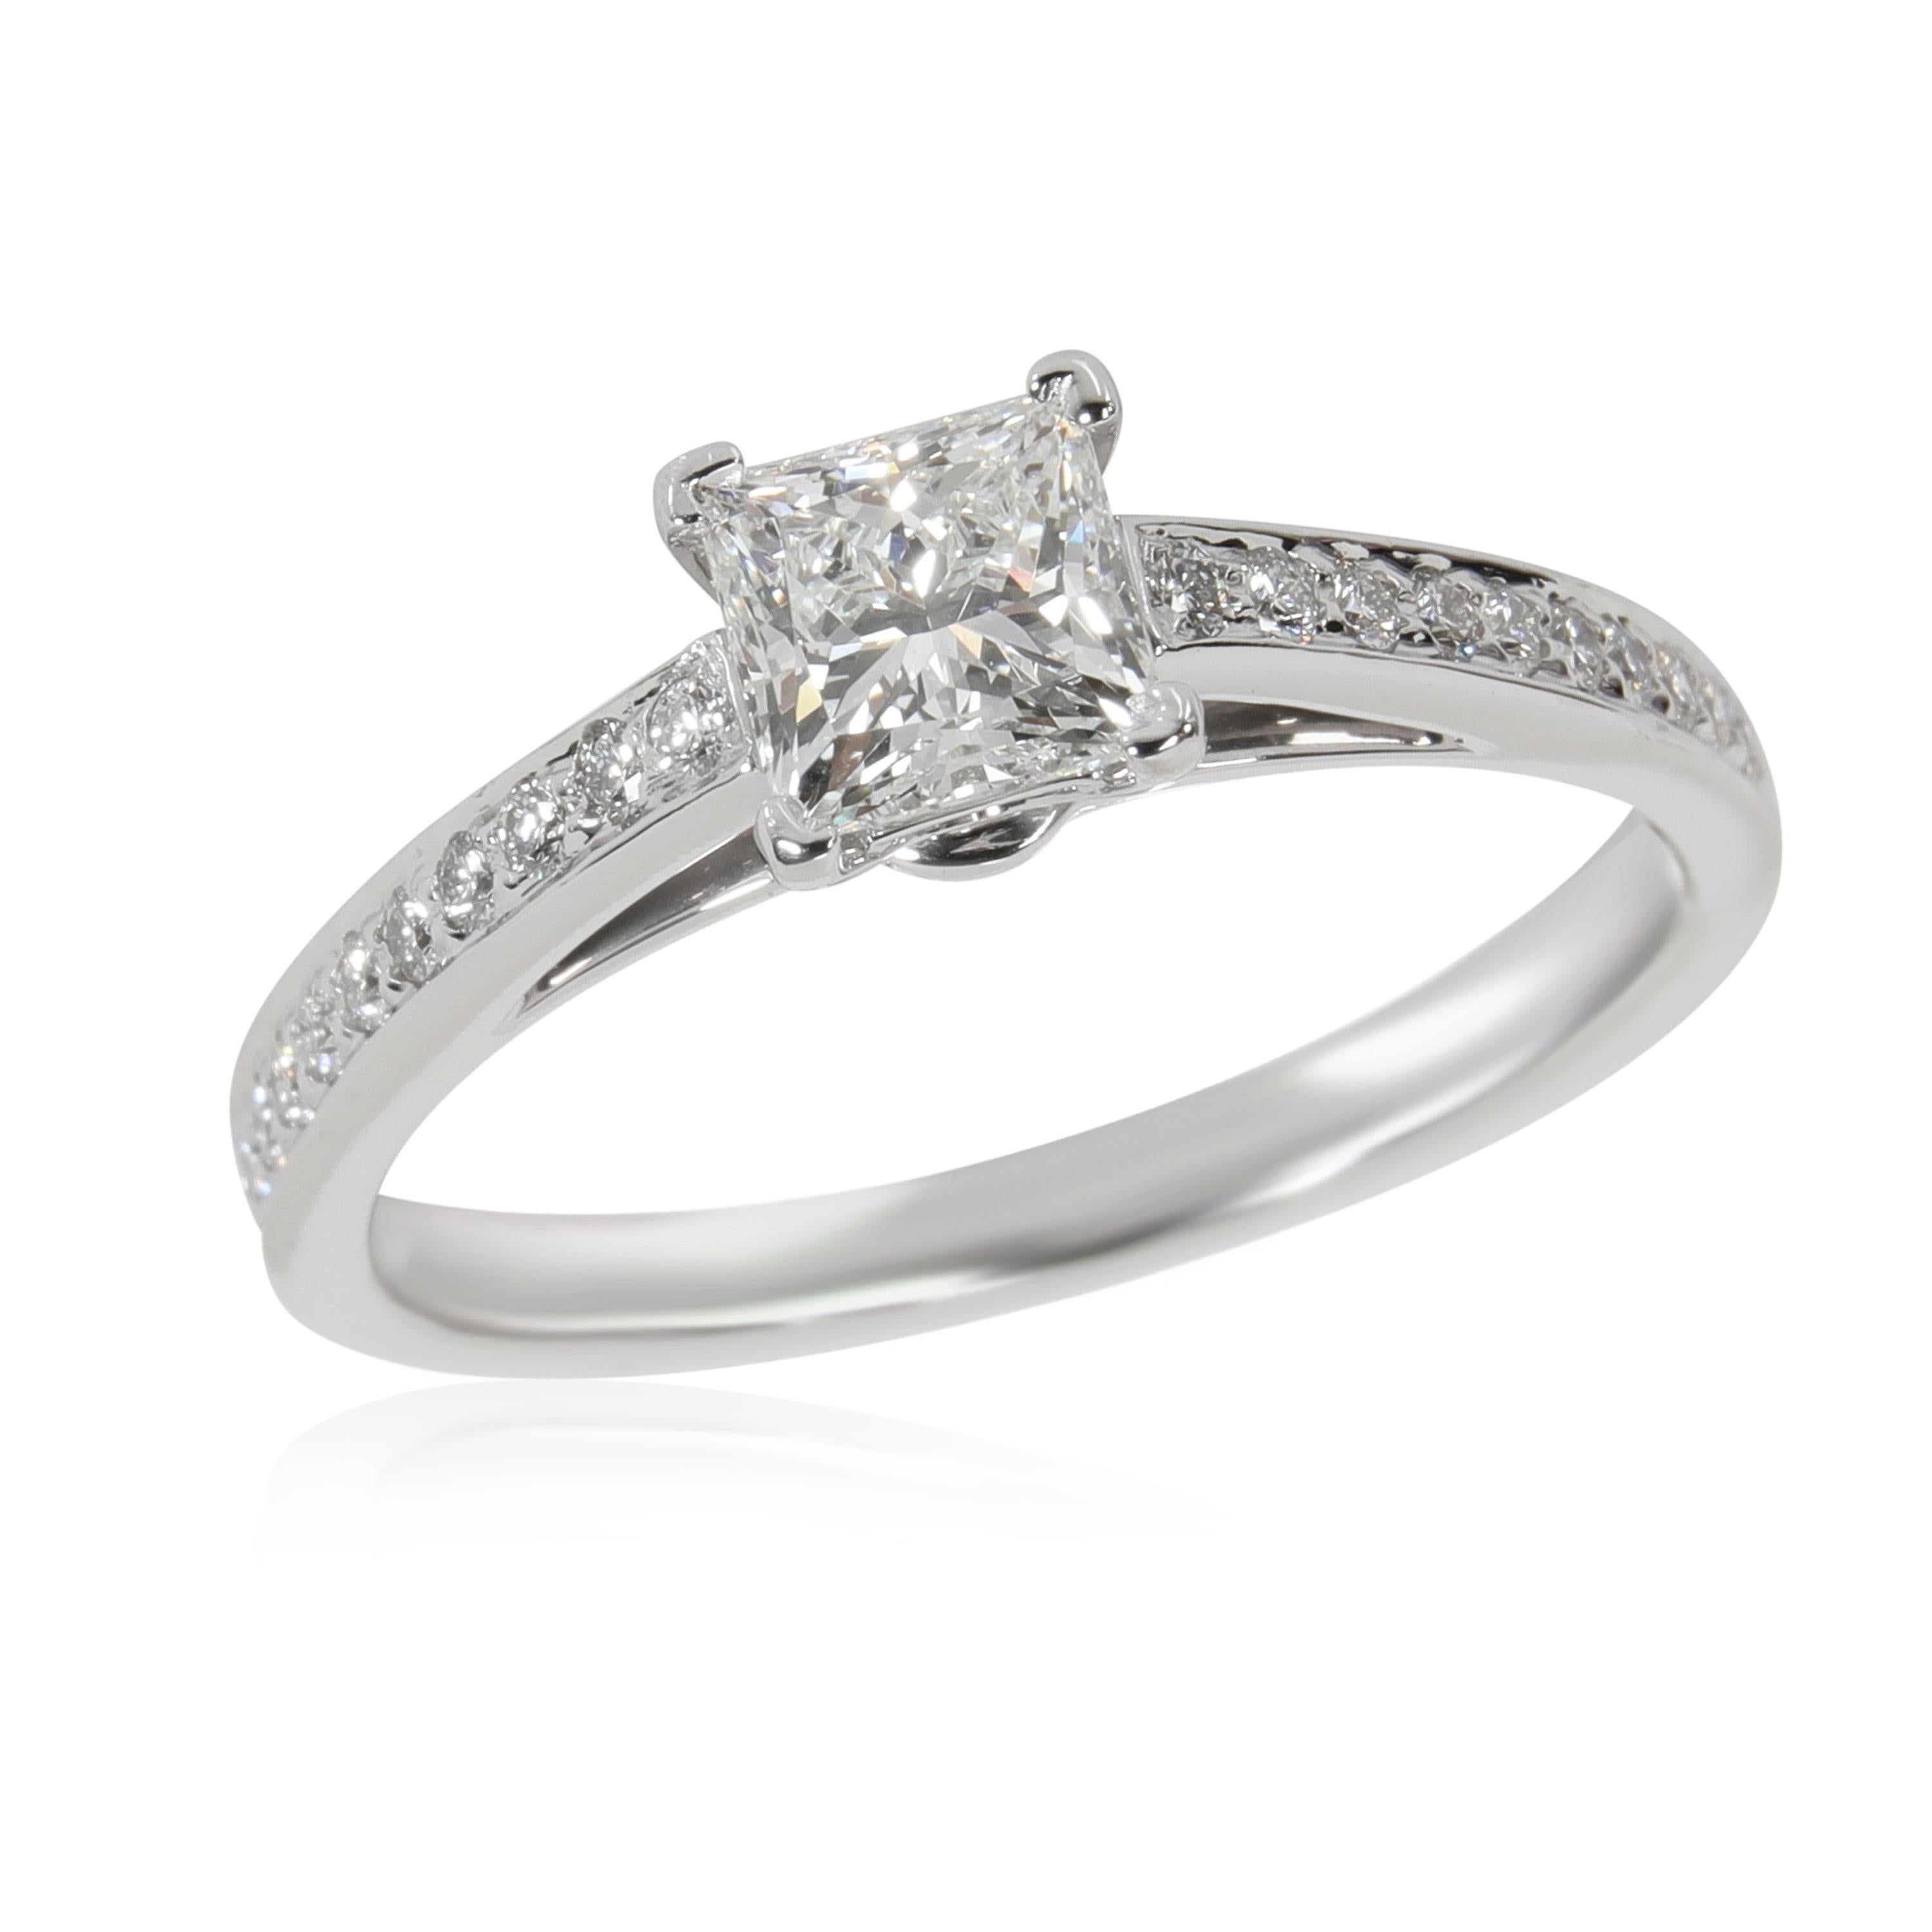 Tiffany & Co. Diamond Engagement Ring in Platinum H VVS1 0.76 CTW

PRIMARY DETAILS
SKU: 114922
Listing Title: Tiffany & Co. Diamond Engagement Ring in Platinum H VVS1 0.76 CTW
Condition Description: Retails for 6590 USD. In excellent condition and